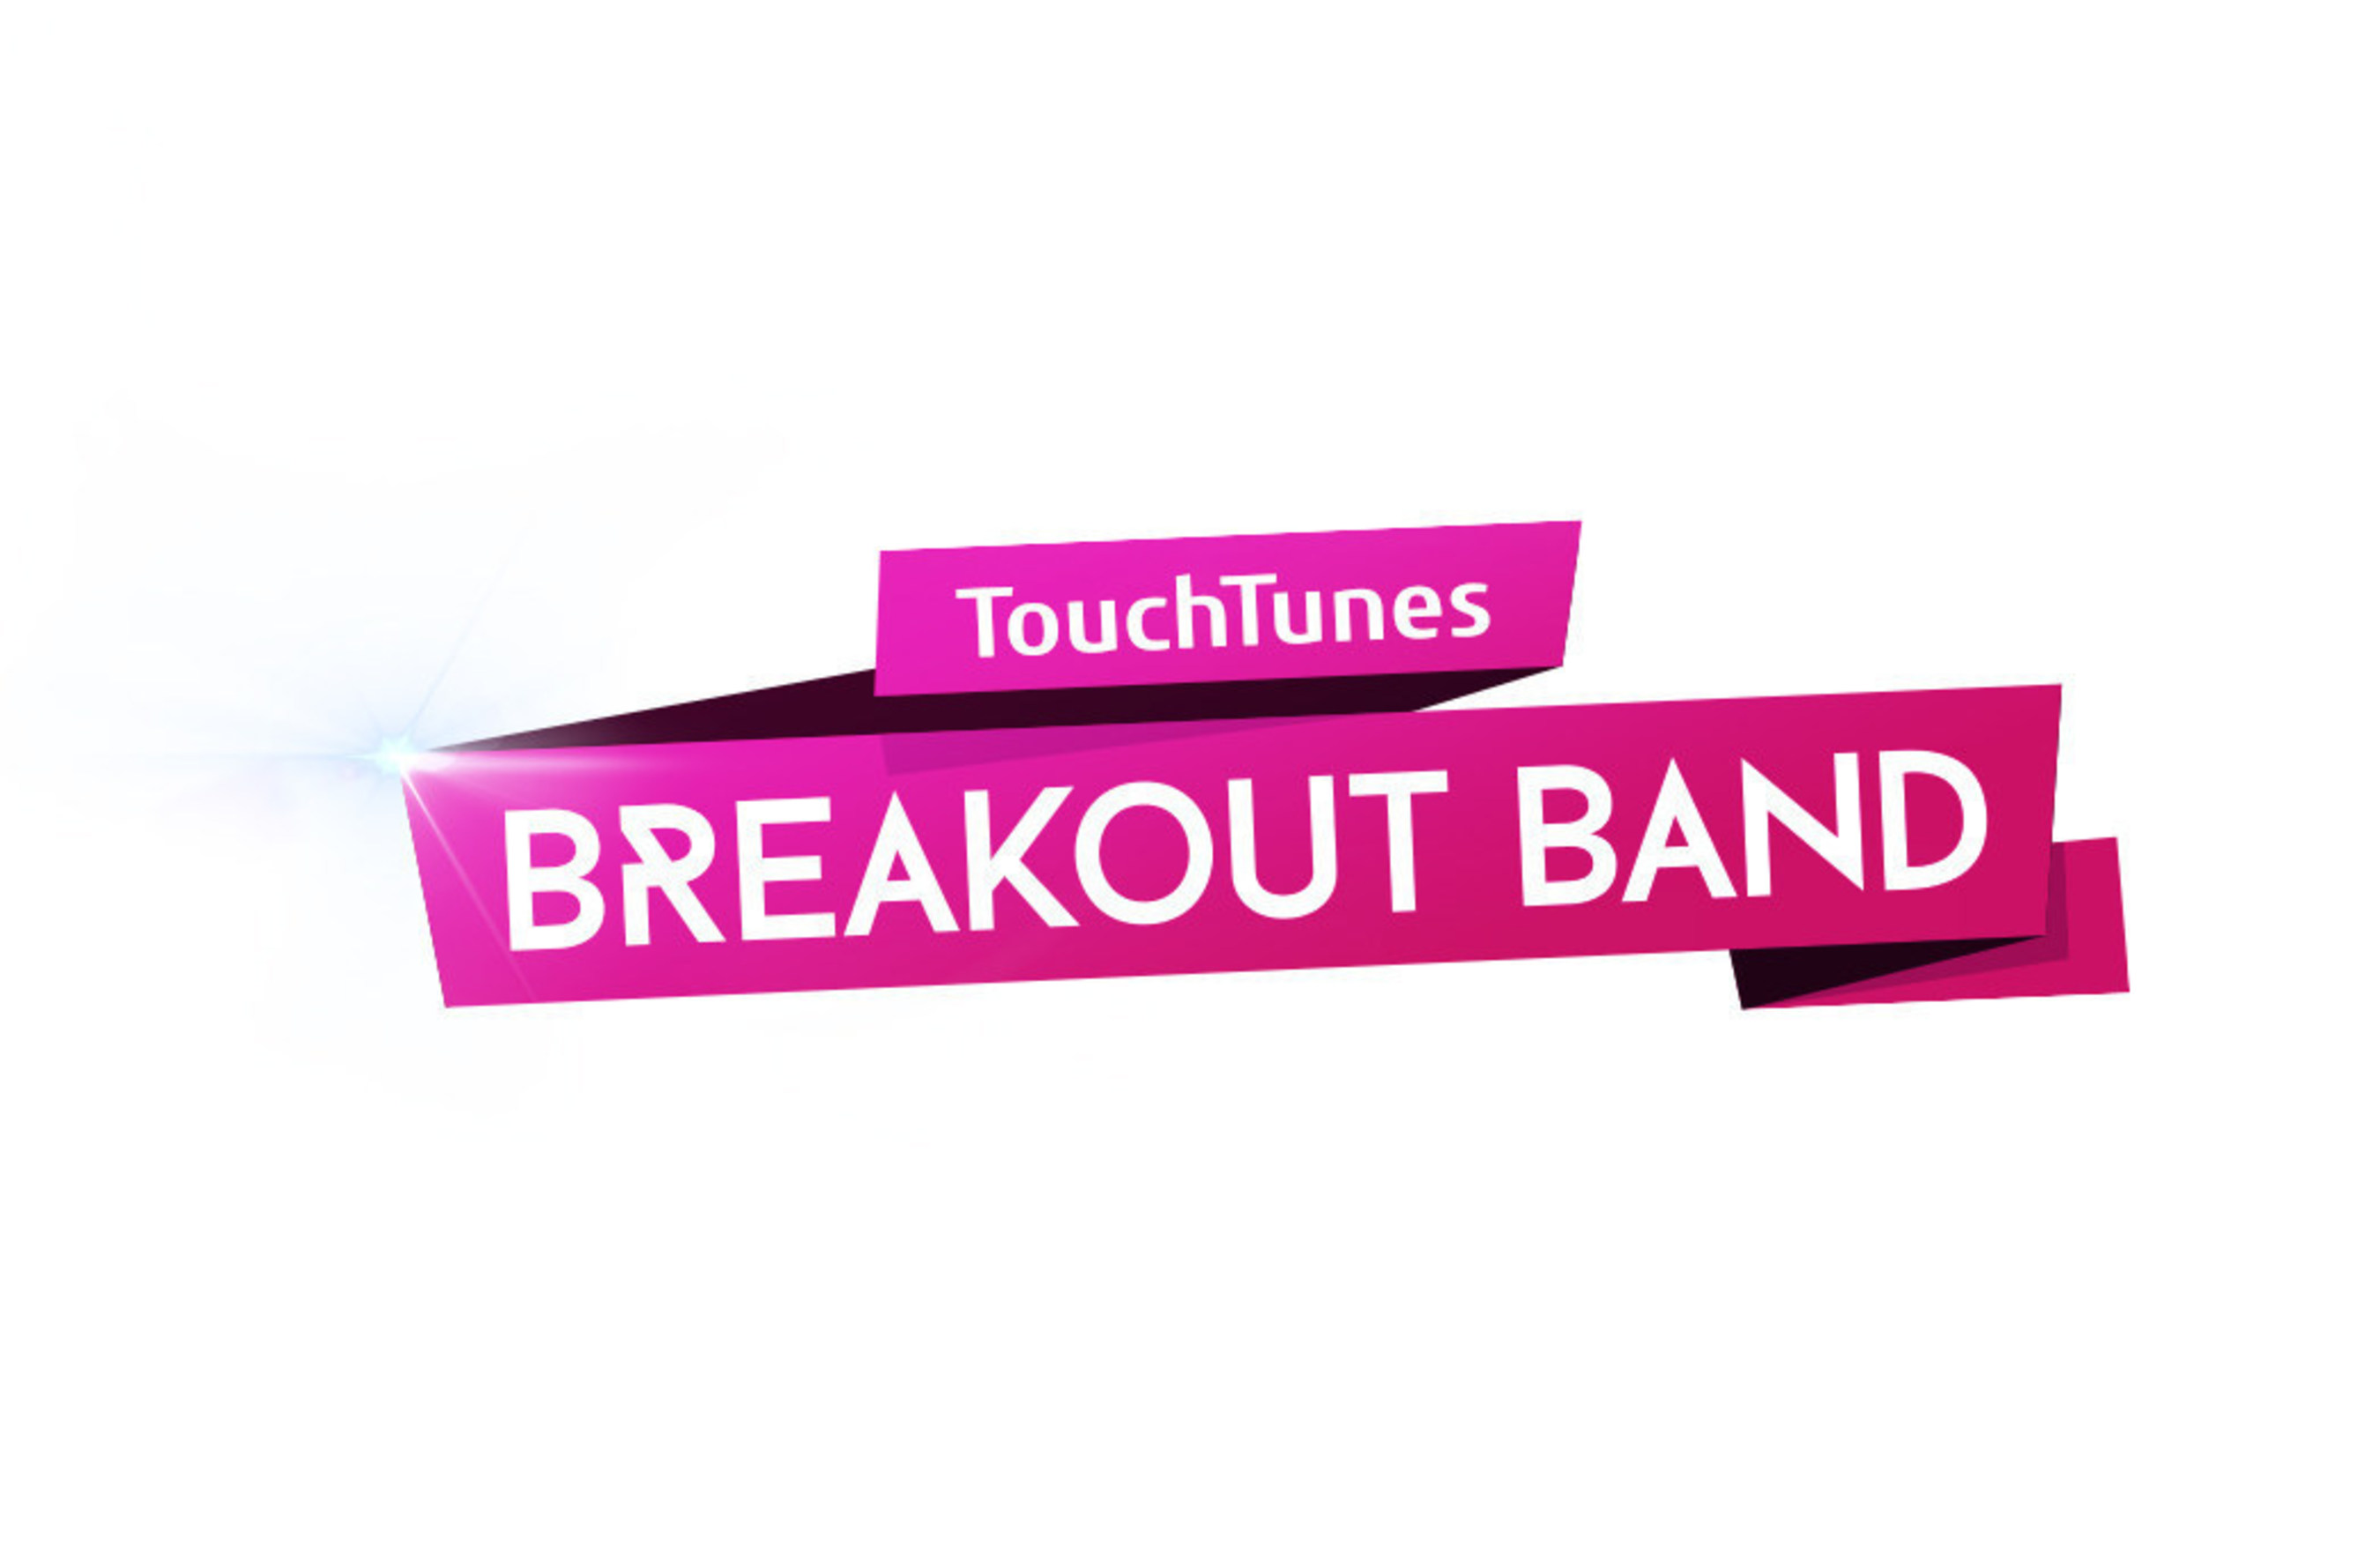 TouchTunes is searching for America's next Breakout Band. Win an audition with Warner Bros. Records A&R.